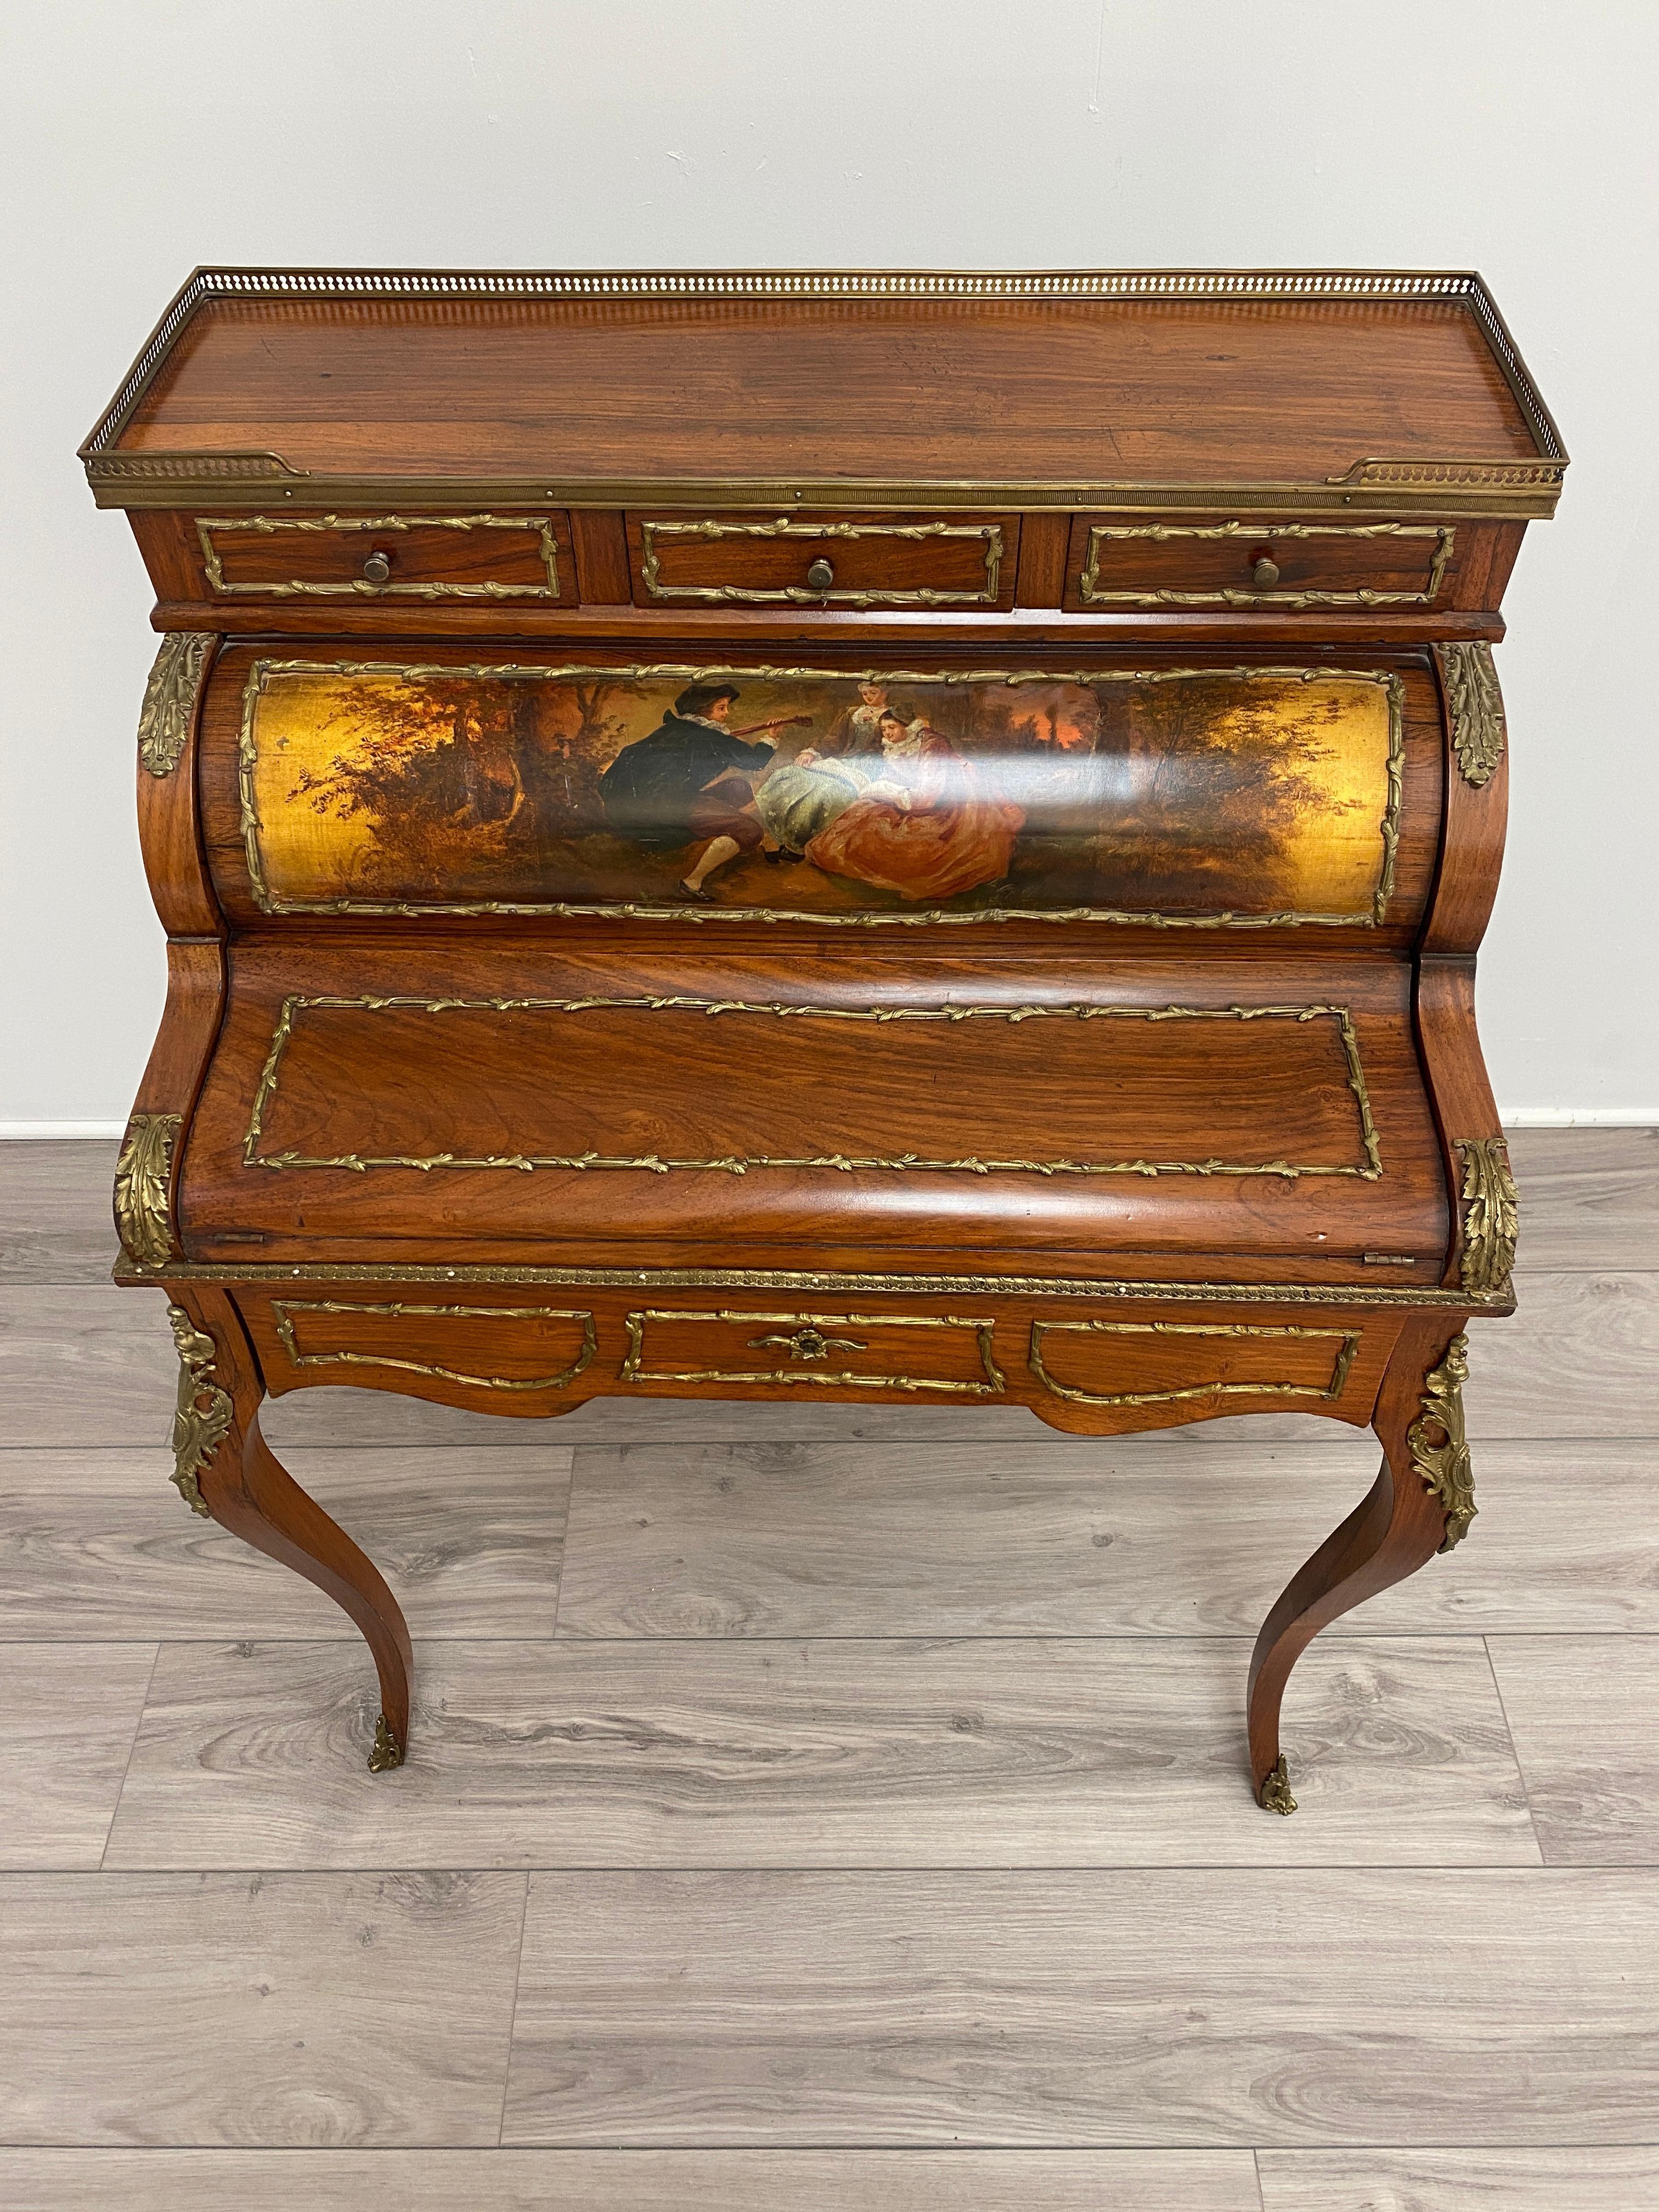 A late 19th century Louis XV style gilt bronze mounted hand painted bureau cylindre. Highly intricate bronze mounts on the writing surface and drawer front. Bronze mounts on the knees of the cabriolet legs as well as bronze sabots on the feet. The